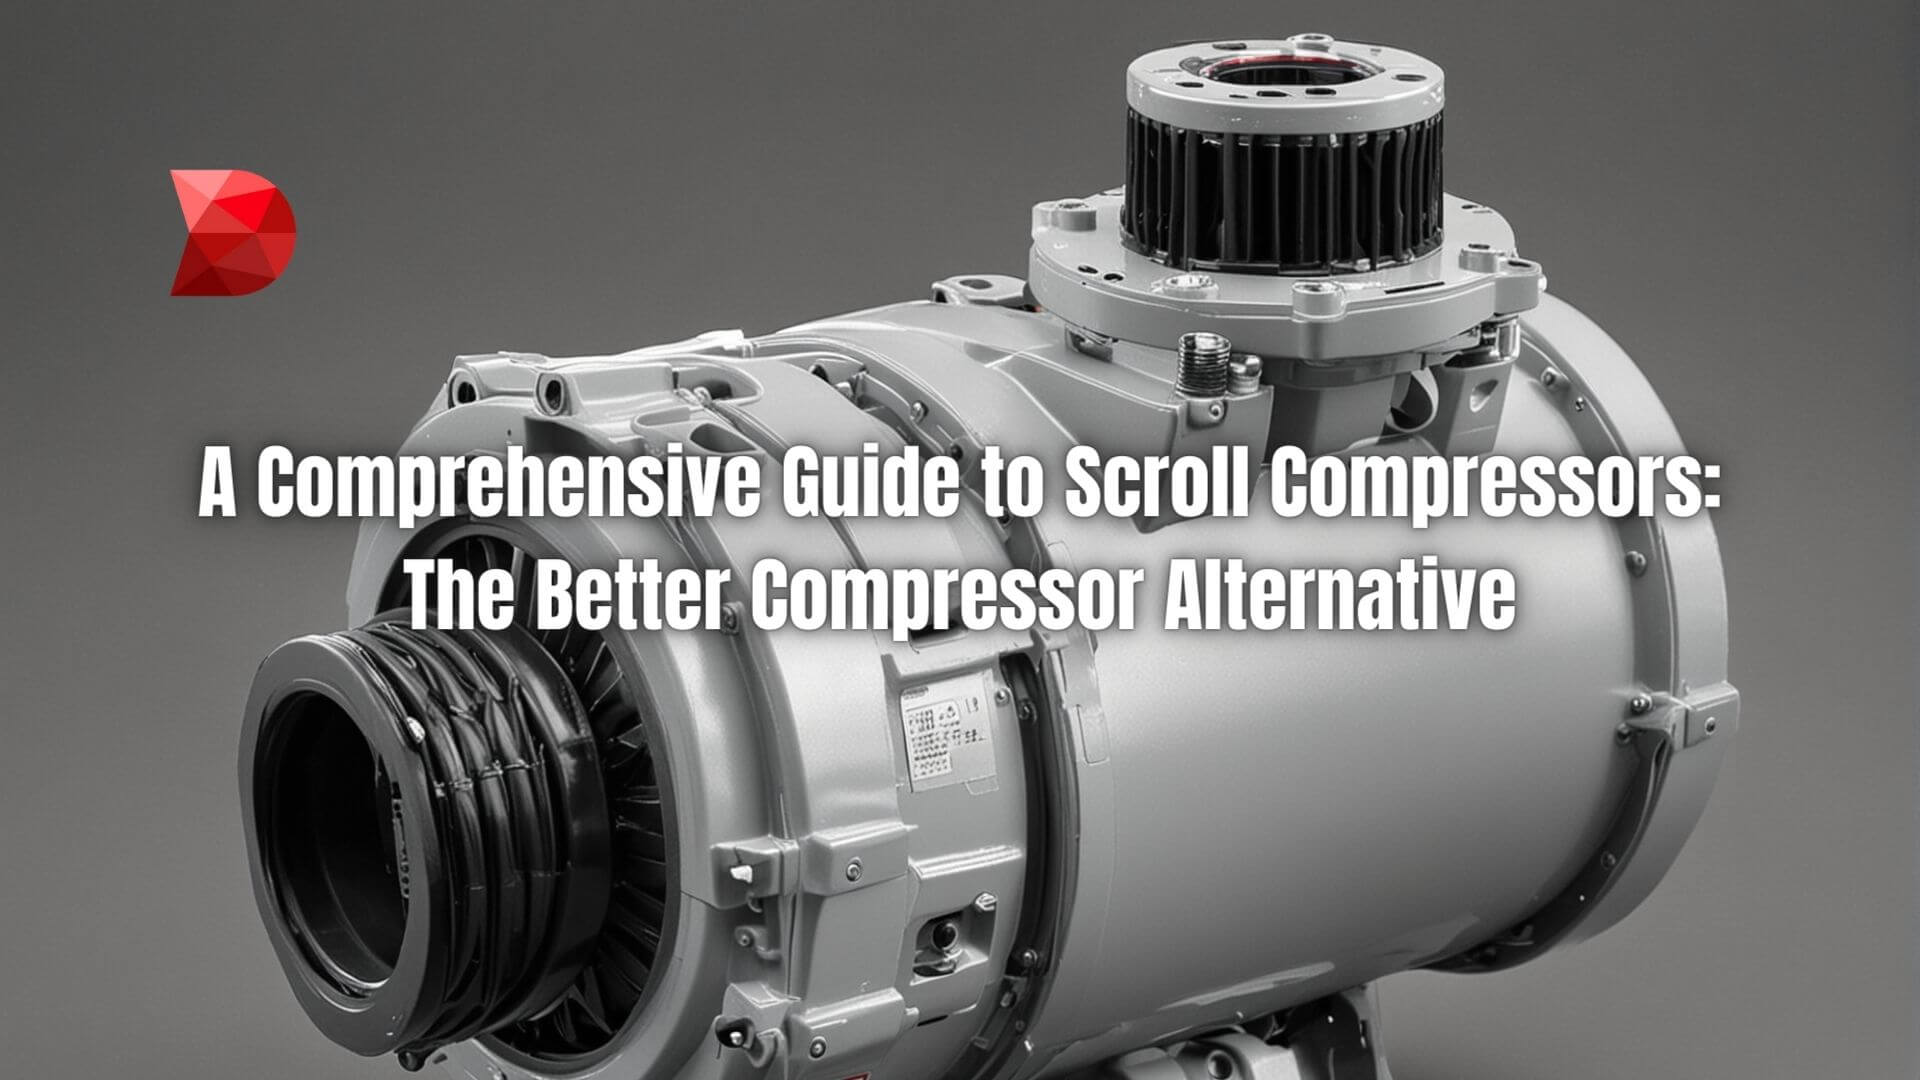 Unveil the advantages of scroll compressors with our guide. Learn why they're considered the better alternative in compressor technology.